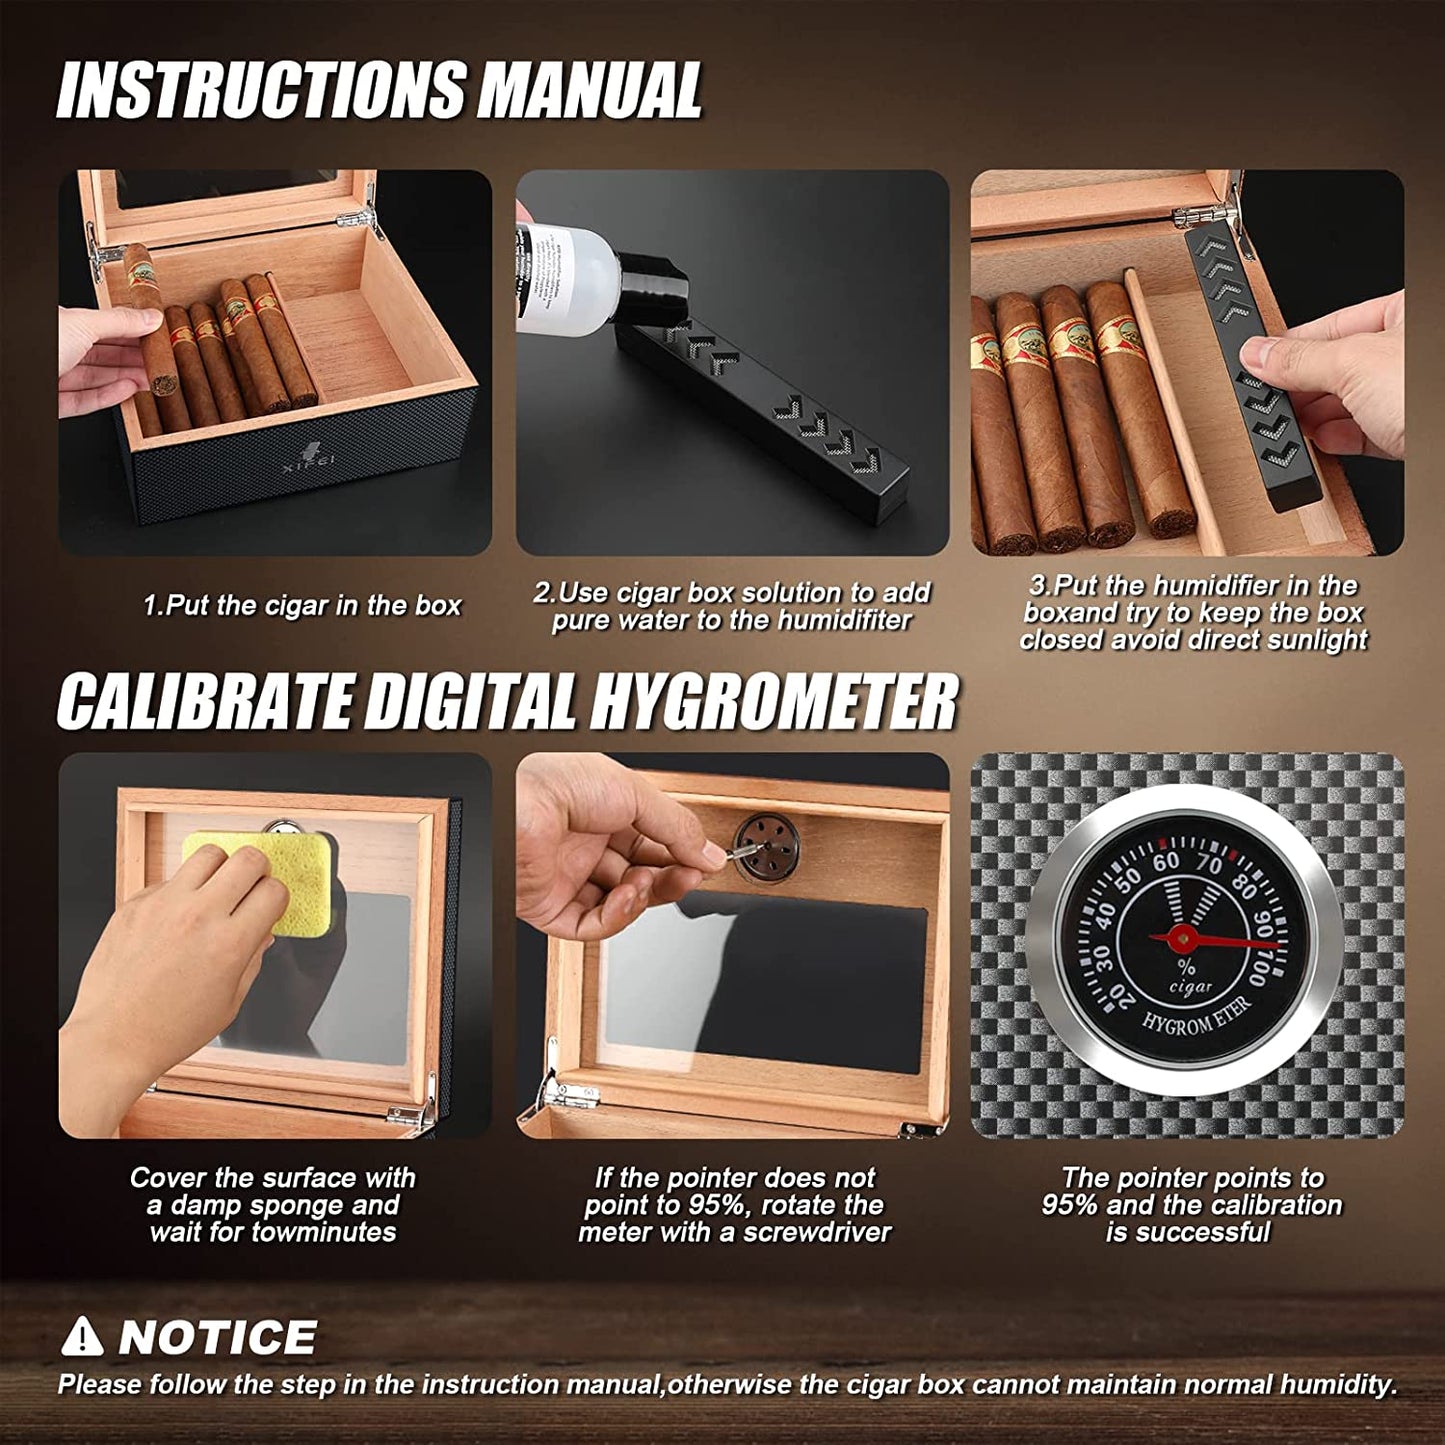 Cigar Humidor, Glass Top Carbon Fiber Texture Top Inlay Hygrometer,Including Cigar Humidifier, Acrylic Cigar Stand,Cigar Ashtray and Humidor Solution, Holds 25-60 Cigars (9IN*7.5 * 2.8)